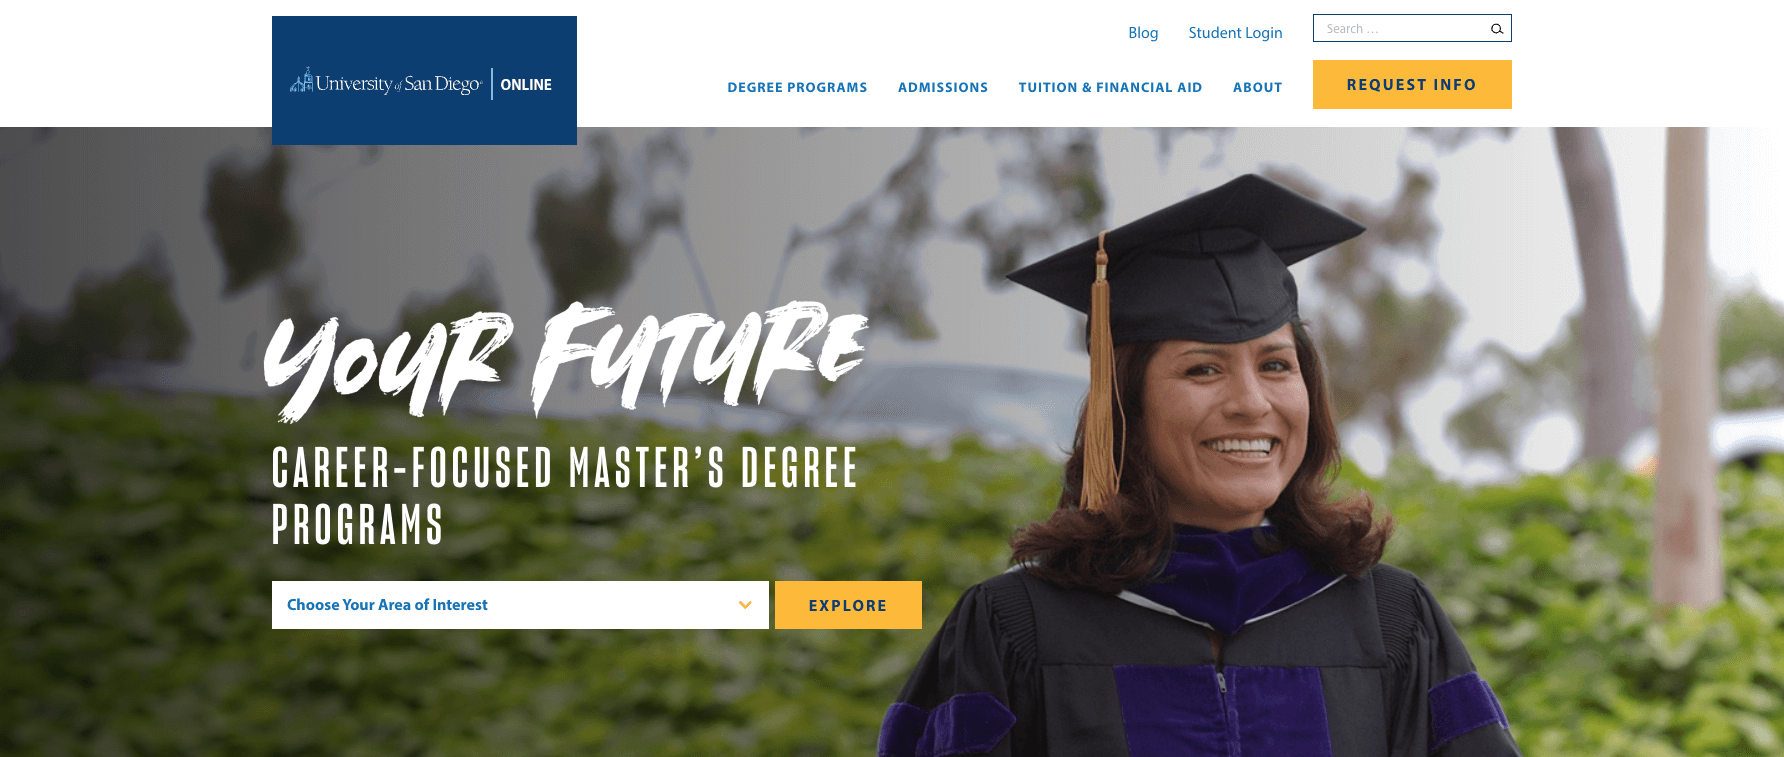 university of san diego online homepage with smiling woman with short brown hair wearing a graduation cap and gown. text says "your future career-focused master's degree programs"